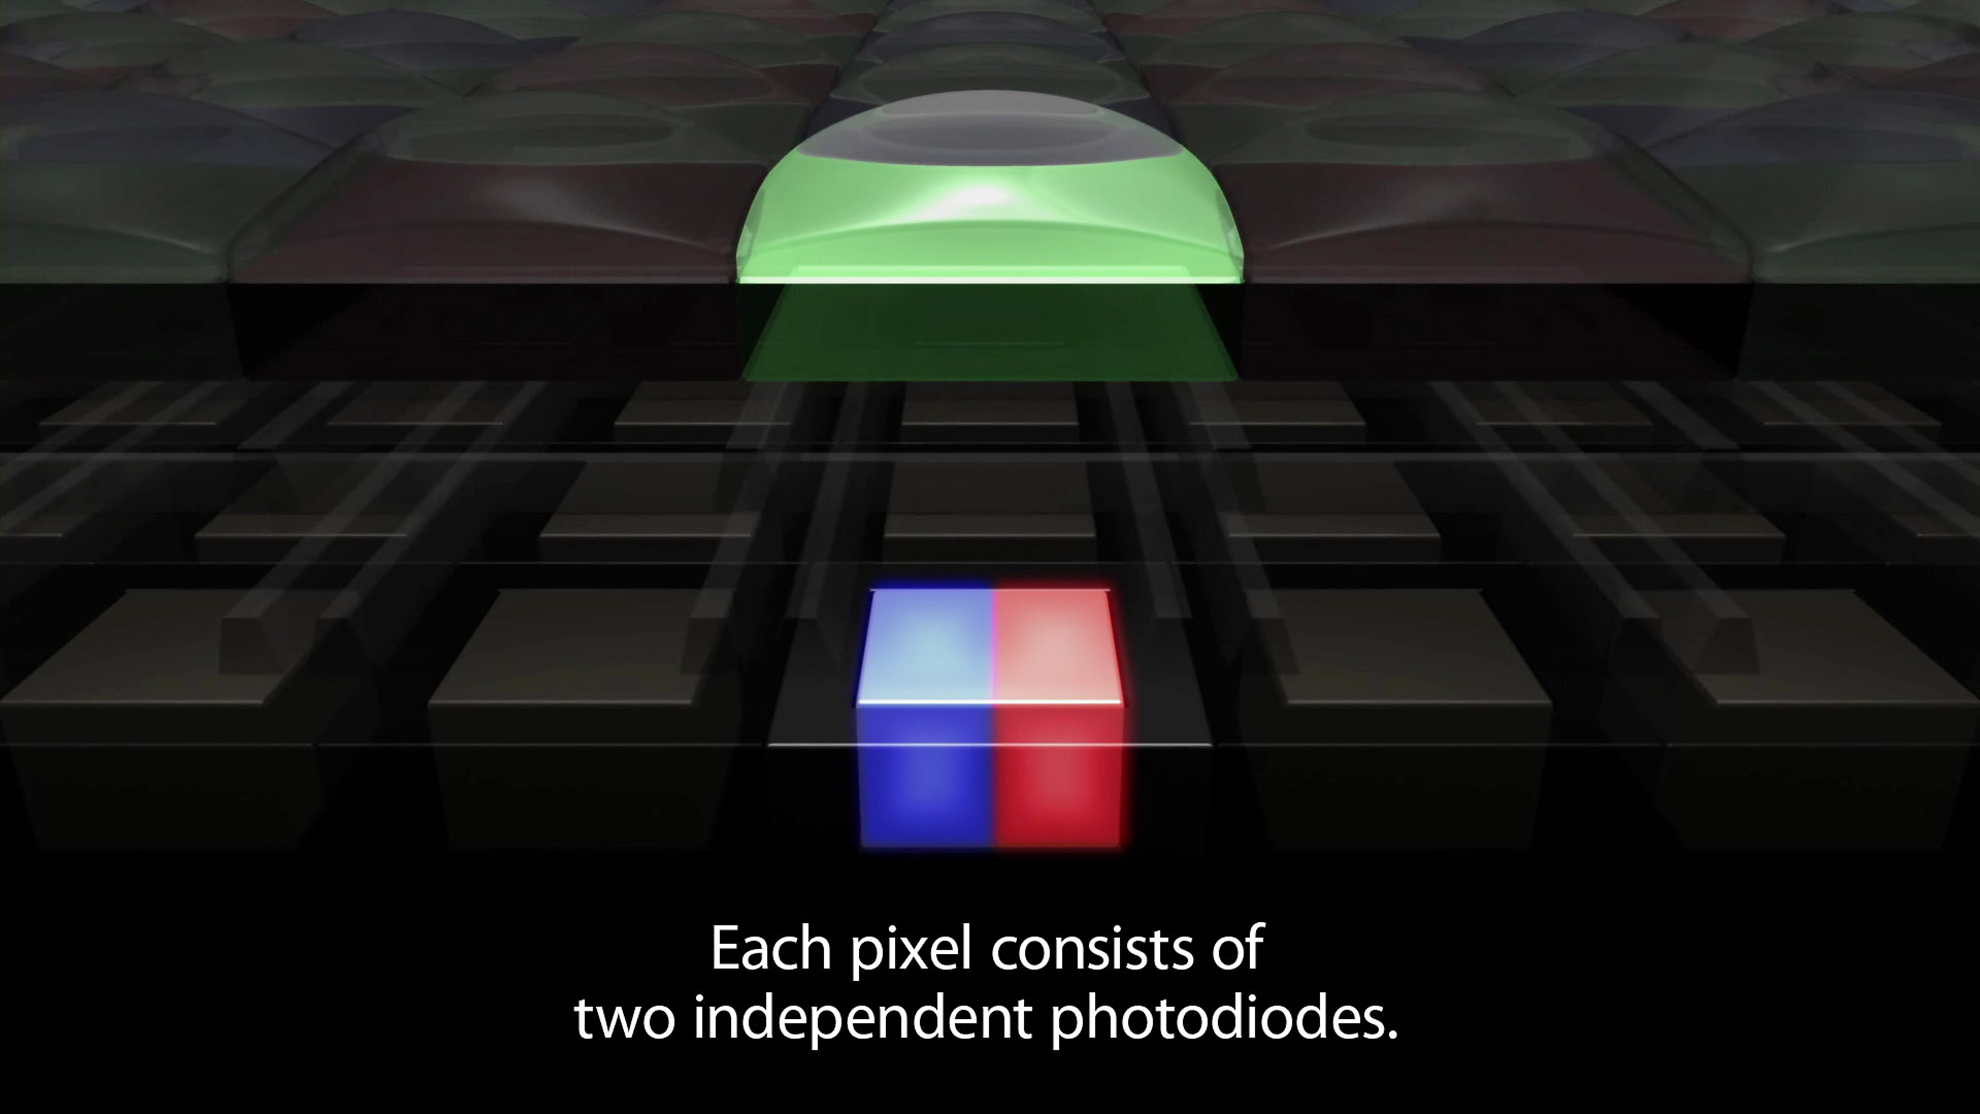 Each pixel consists of two independent photodiodes